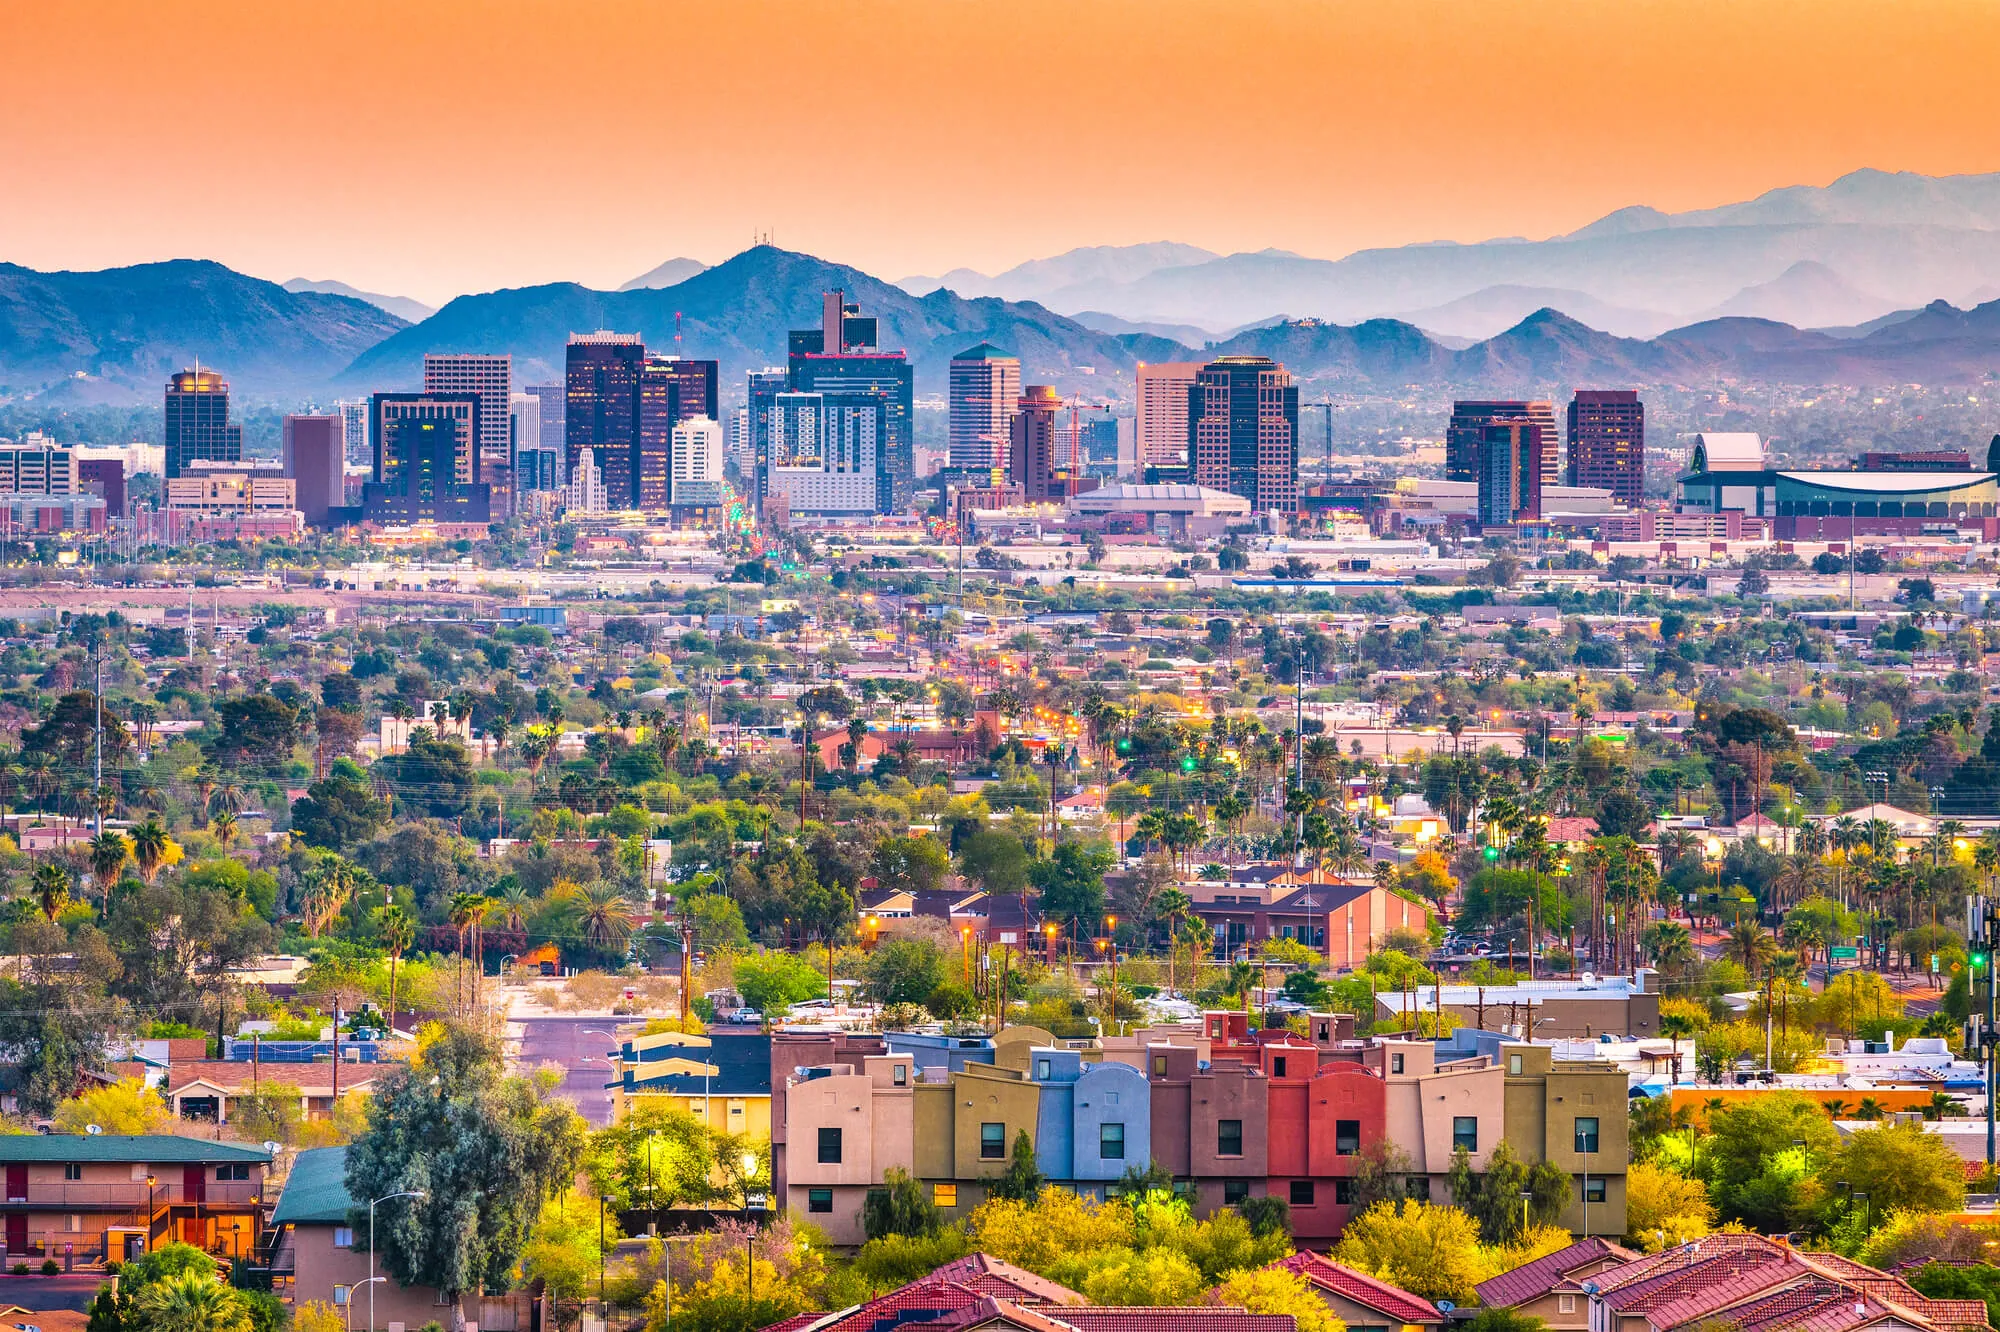 Phoenix, Arizona has been named the most LGBTQ-friendly city in the state